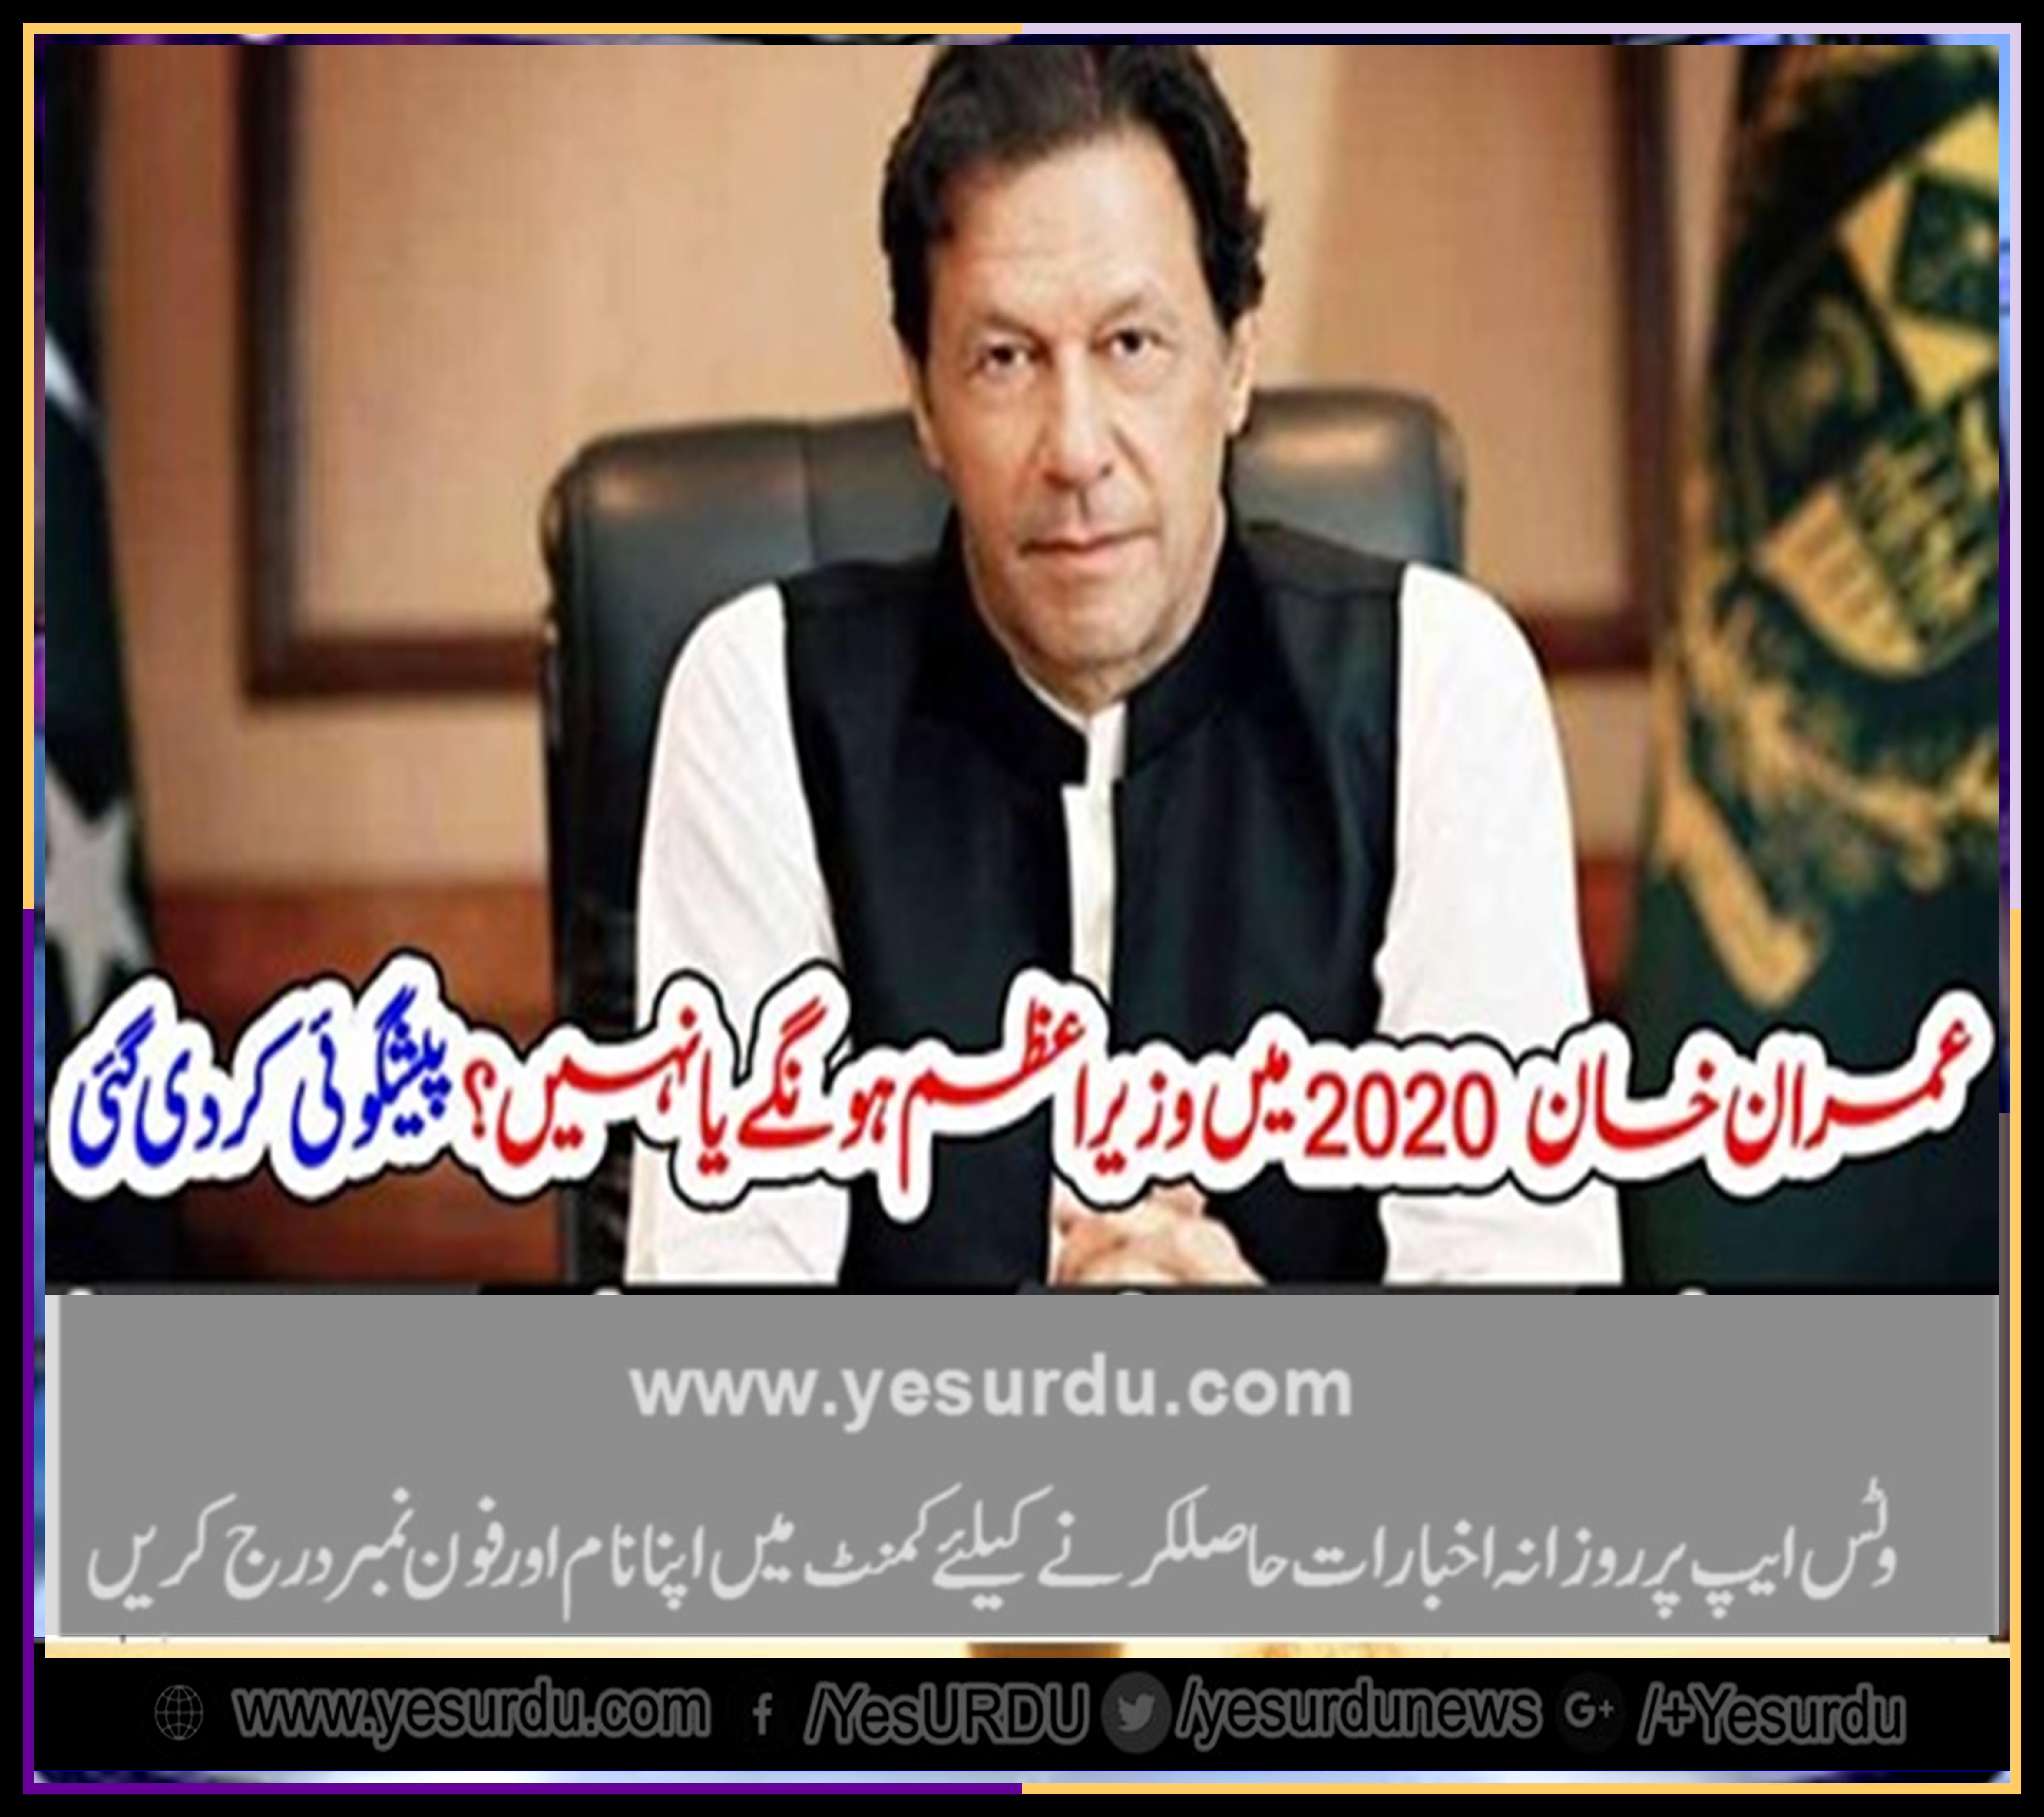 imran khan, can, be, prime, minister, till, 2020, or, not, new, prediction, came